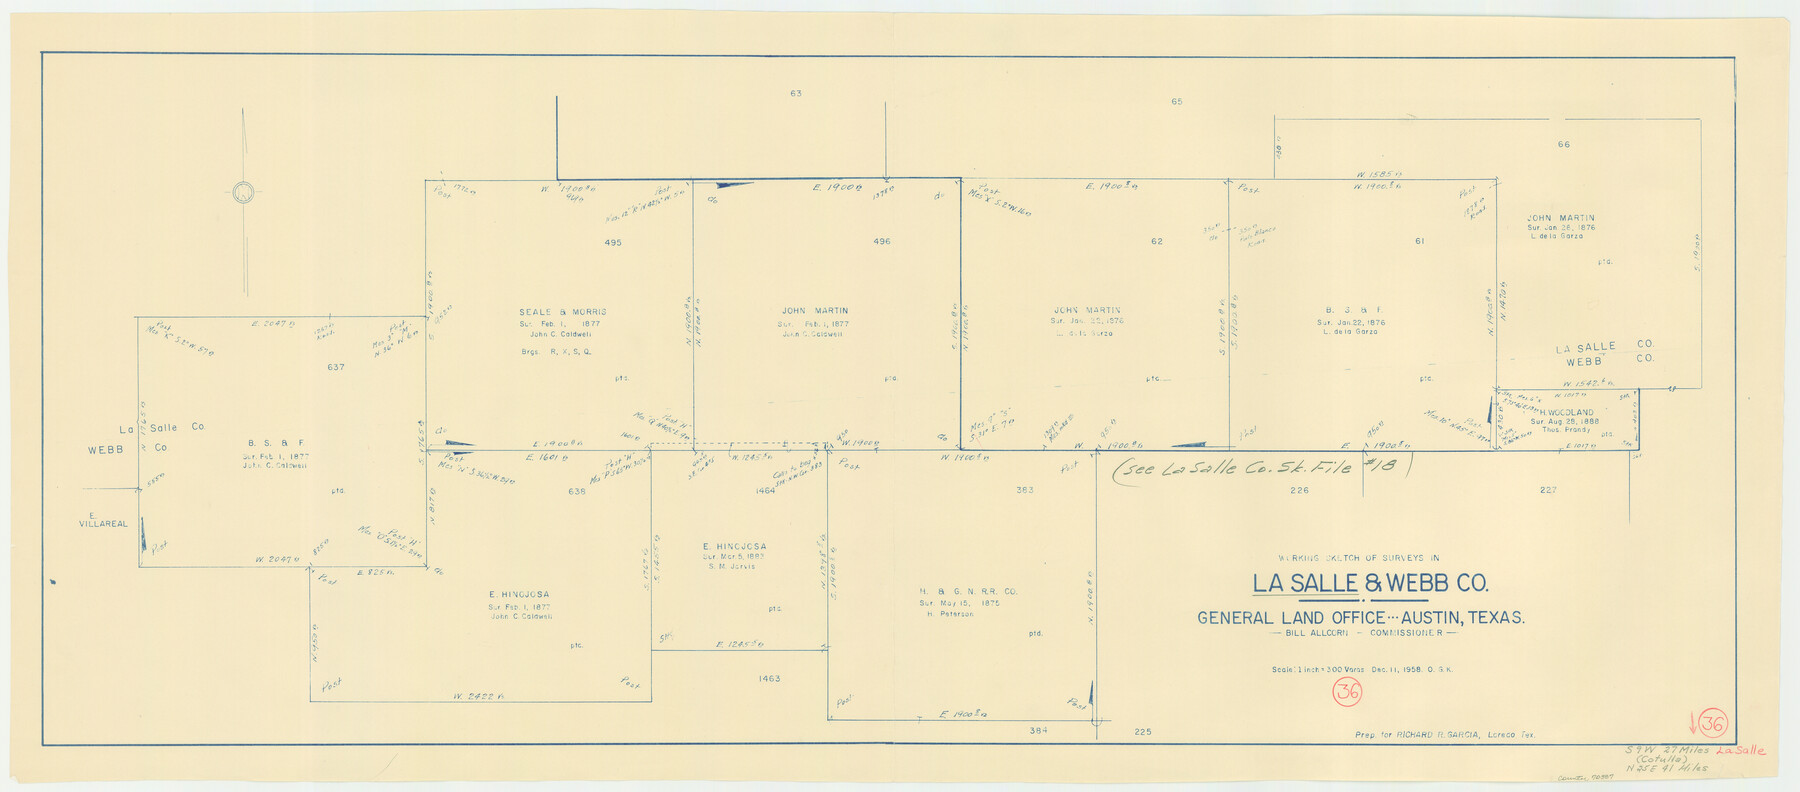 70337, La Salle County Working Sketch 36, General Map Collection